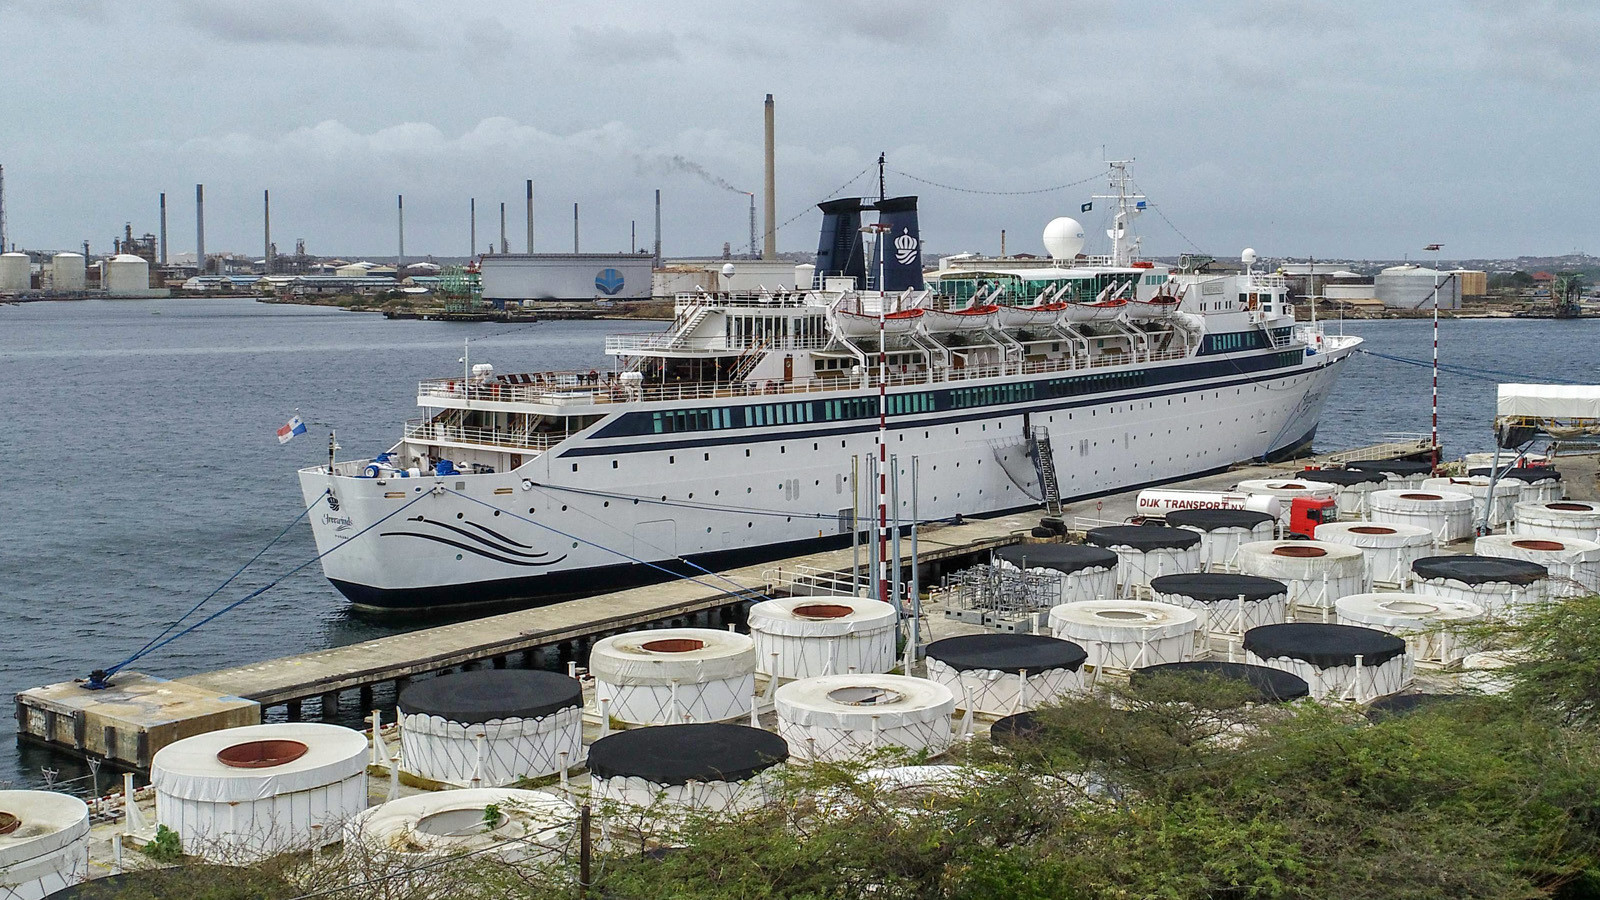 Measles scare forces 28 to remain on Scientology ship in Curacao